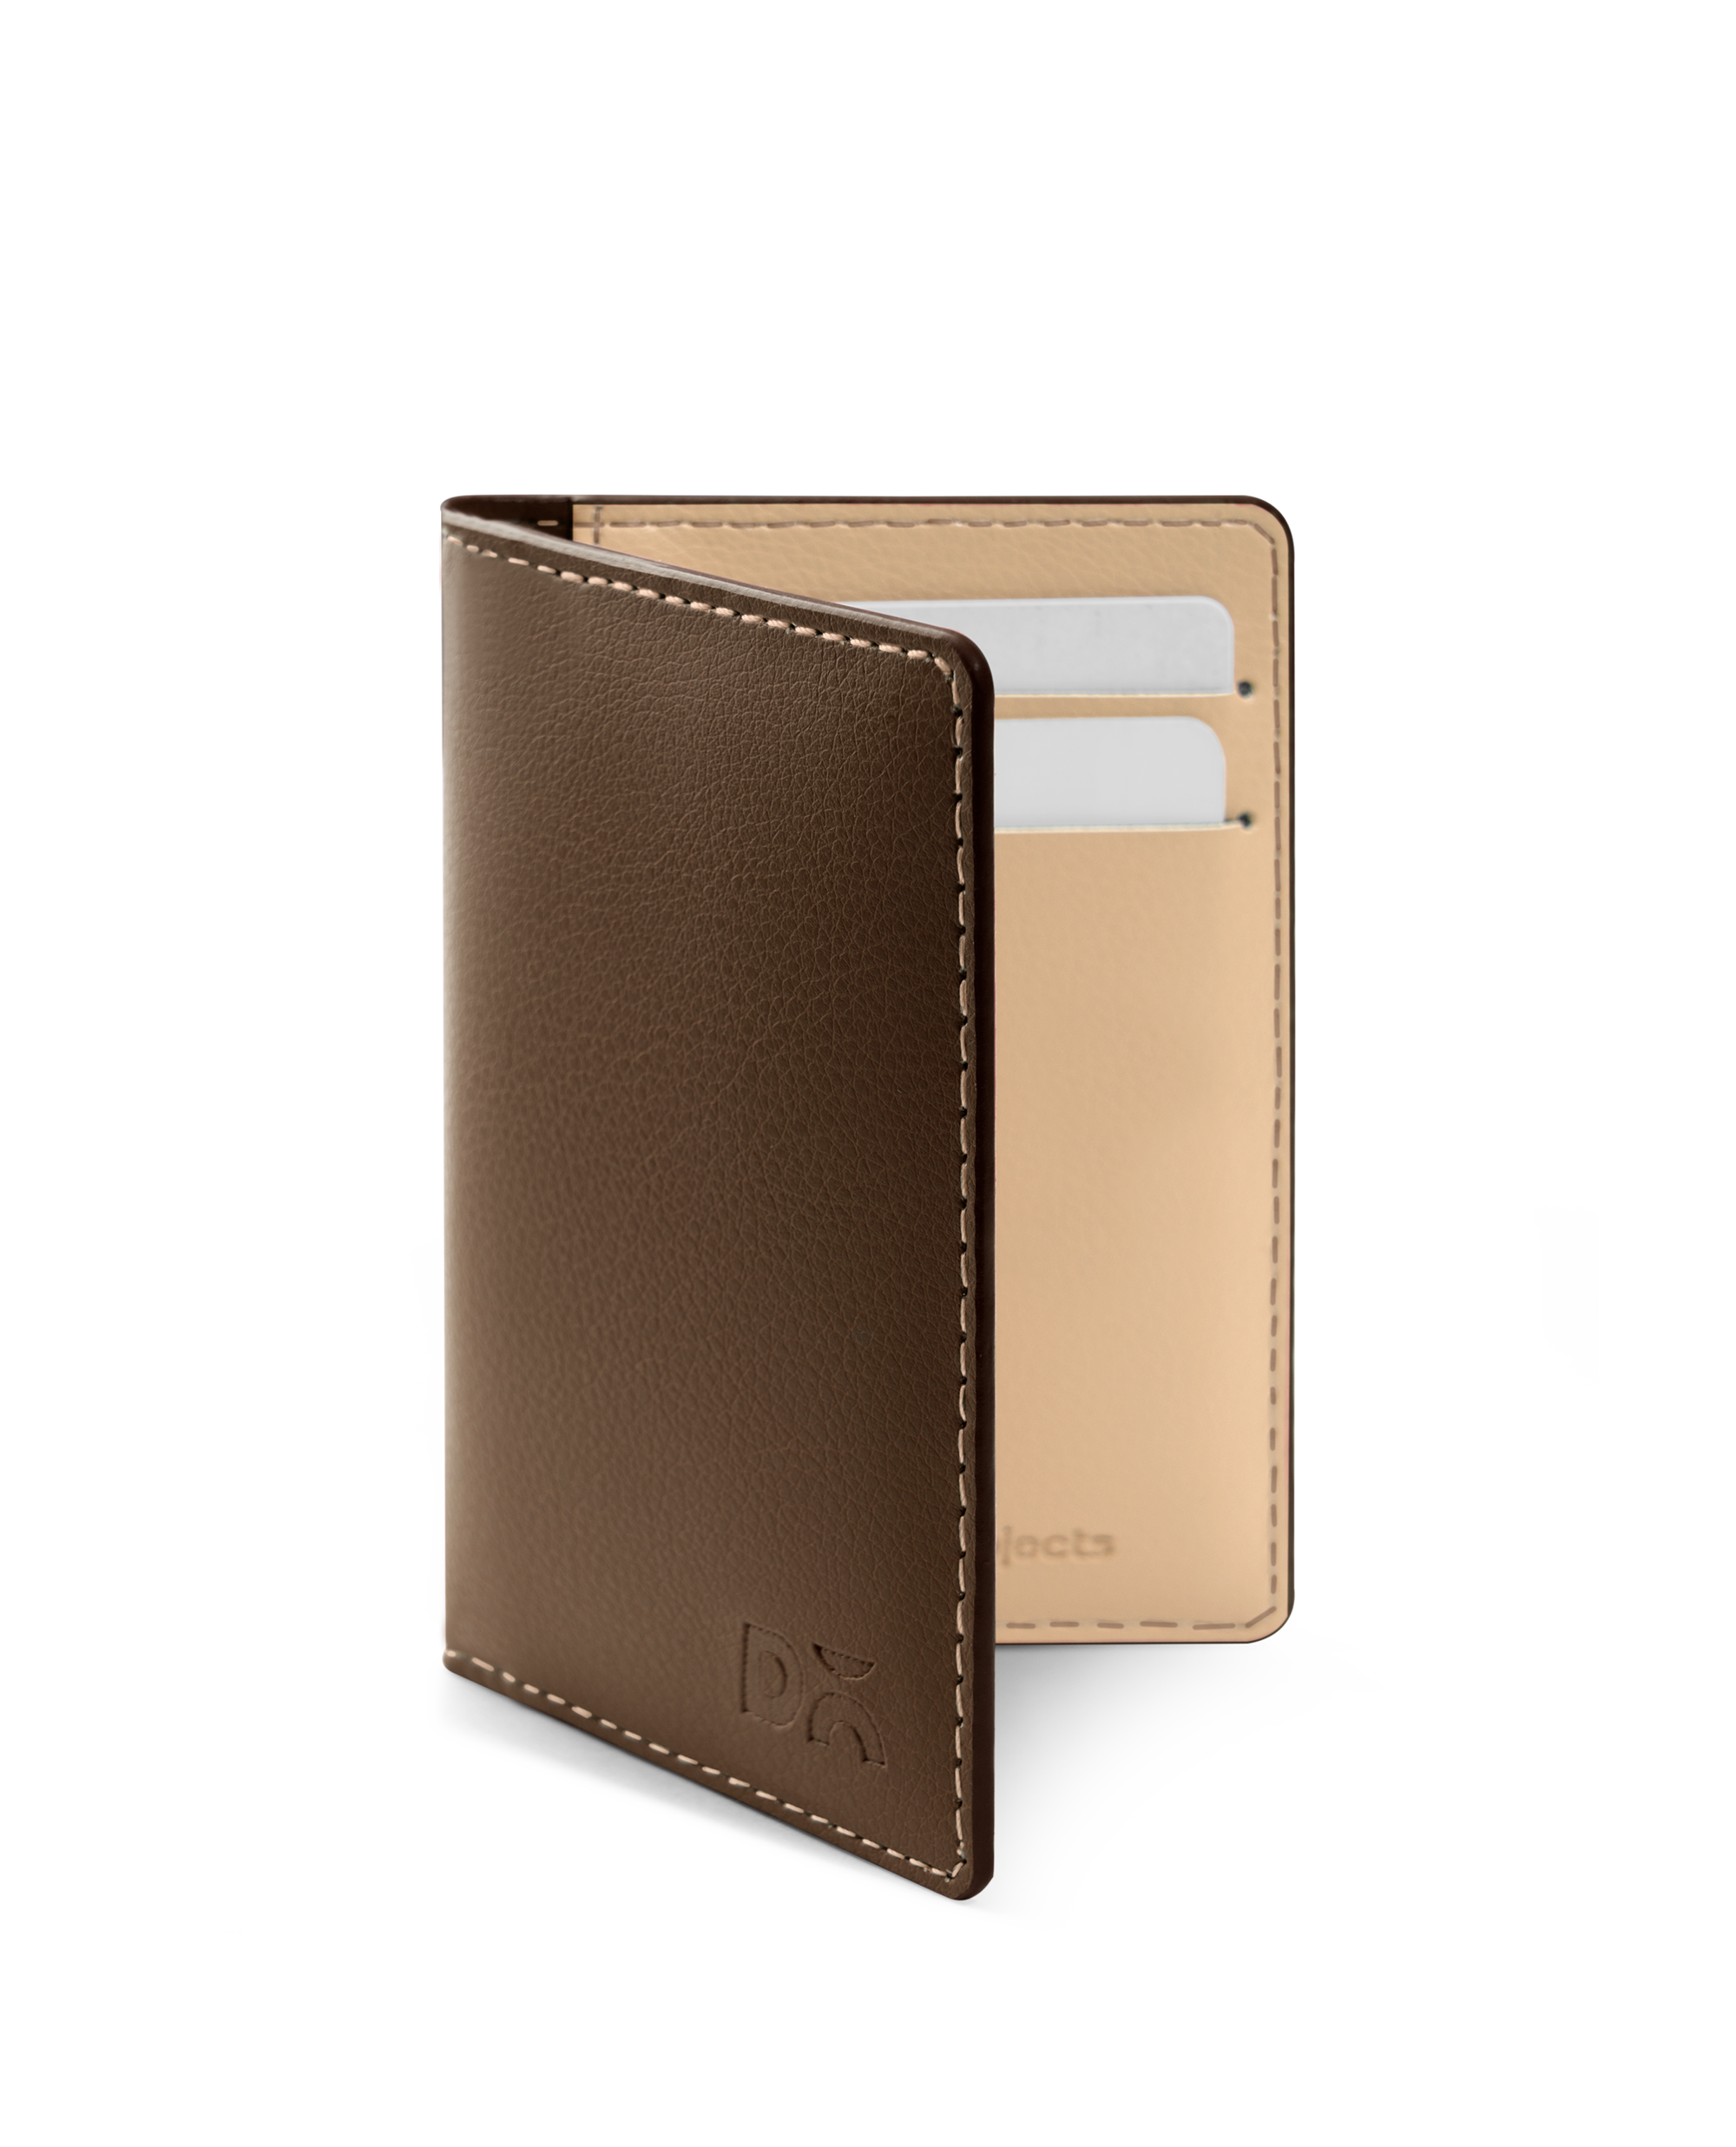 Walnut Brown CardSafe Phone Wallet by DailyObjects